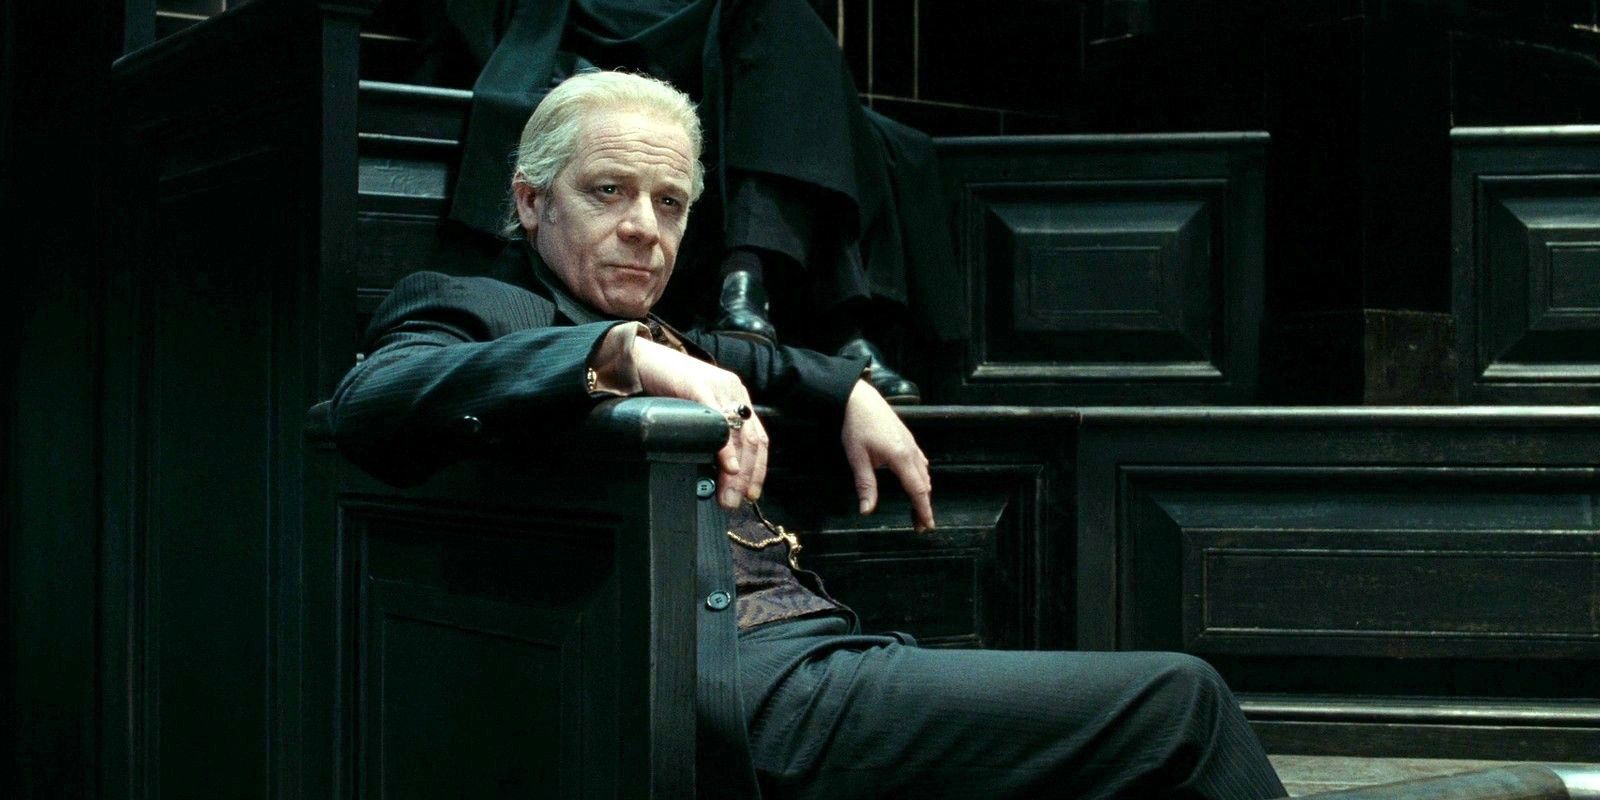 Harry Potter 13 Strongest Death Eaters (And 7 So Weak Theyre Useless) Ranked